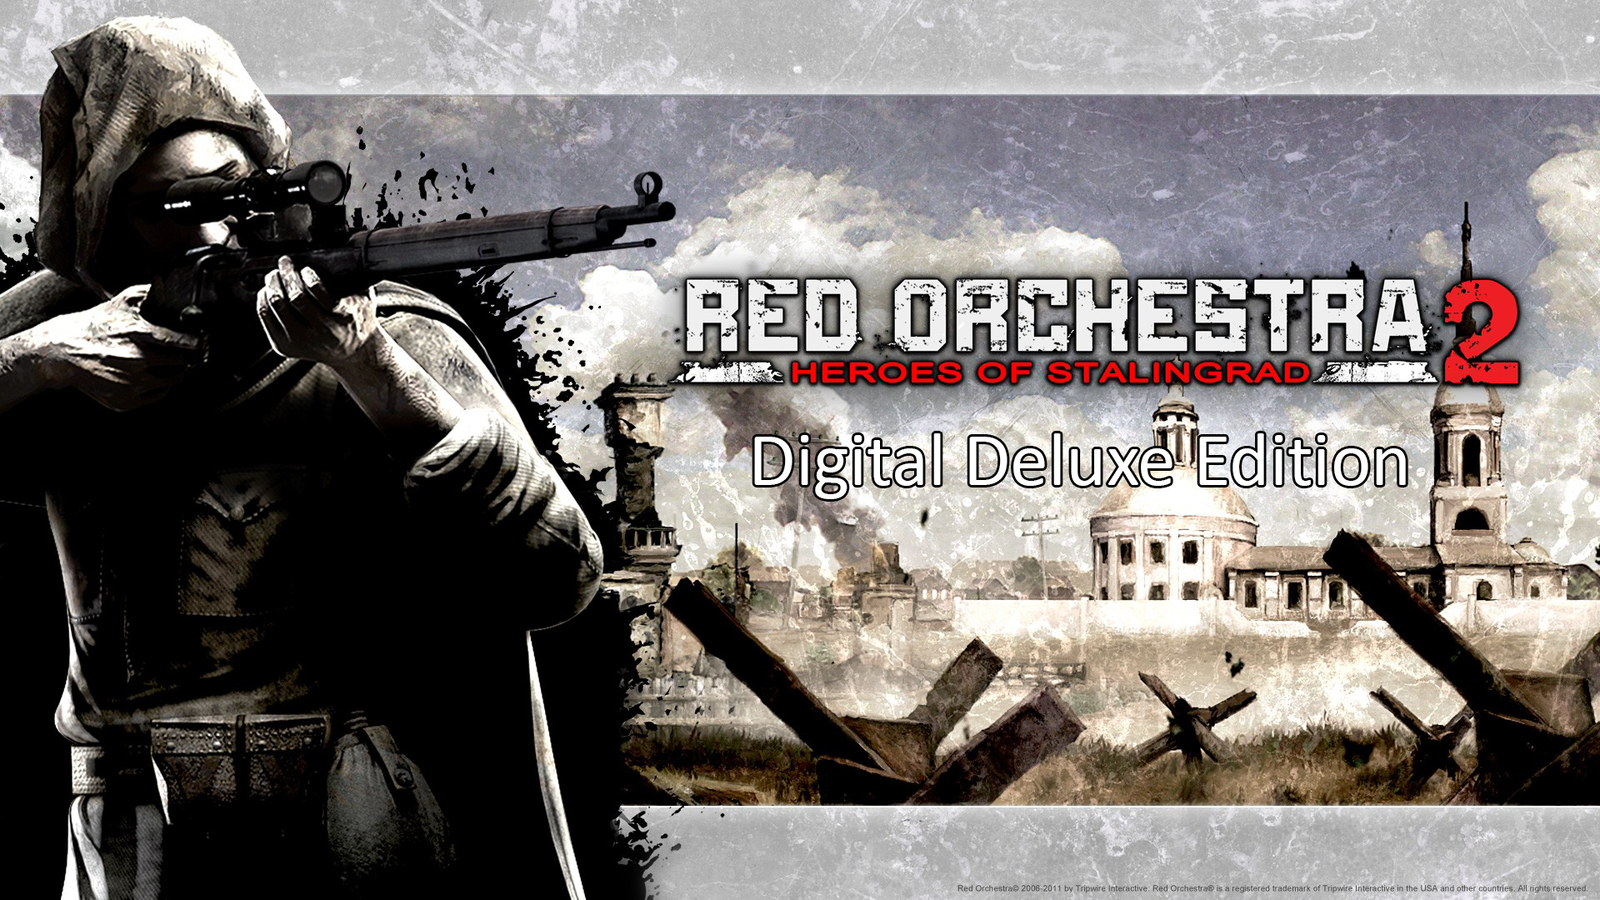 Red Orchestra 2: Heroes of Stalingrad with Rising Storm - Digital Deluxe Edition